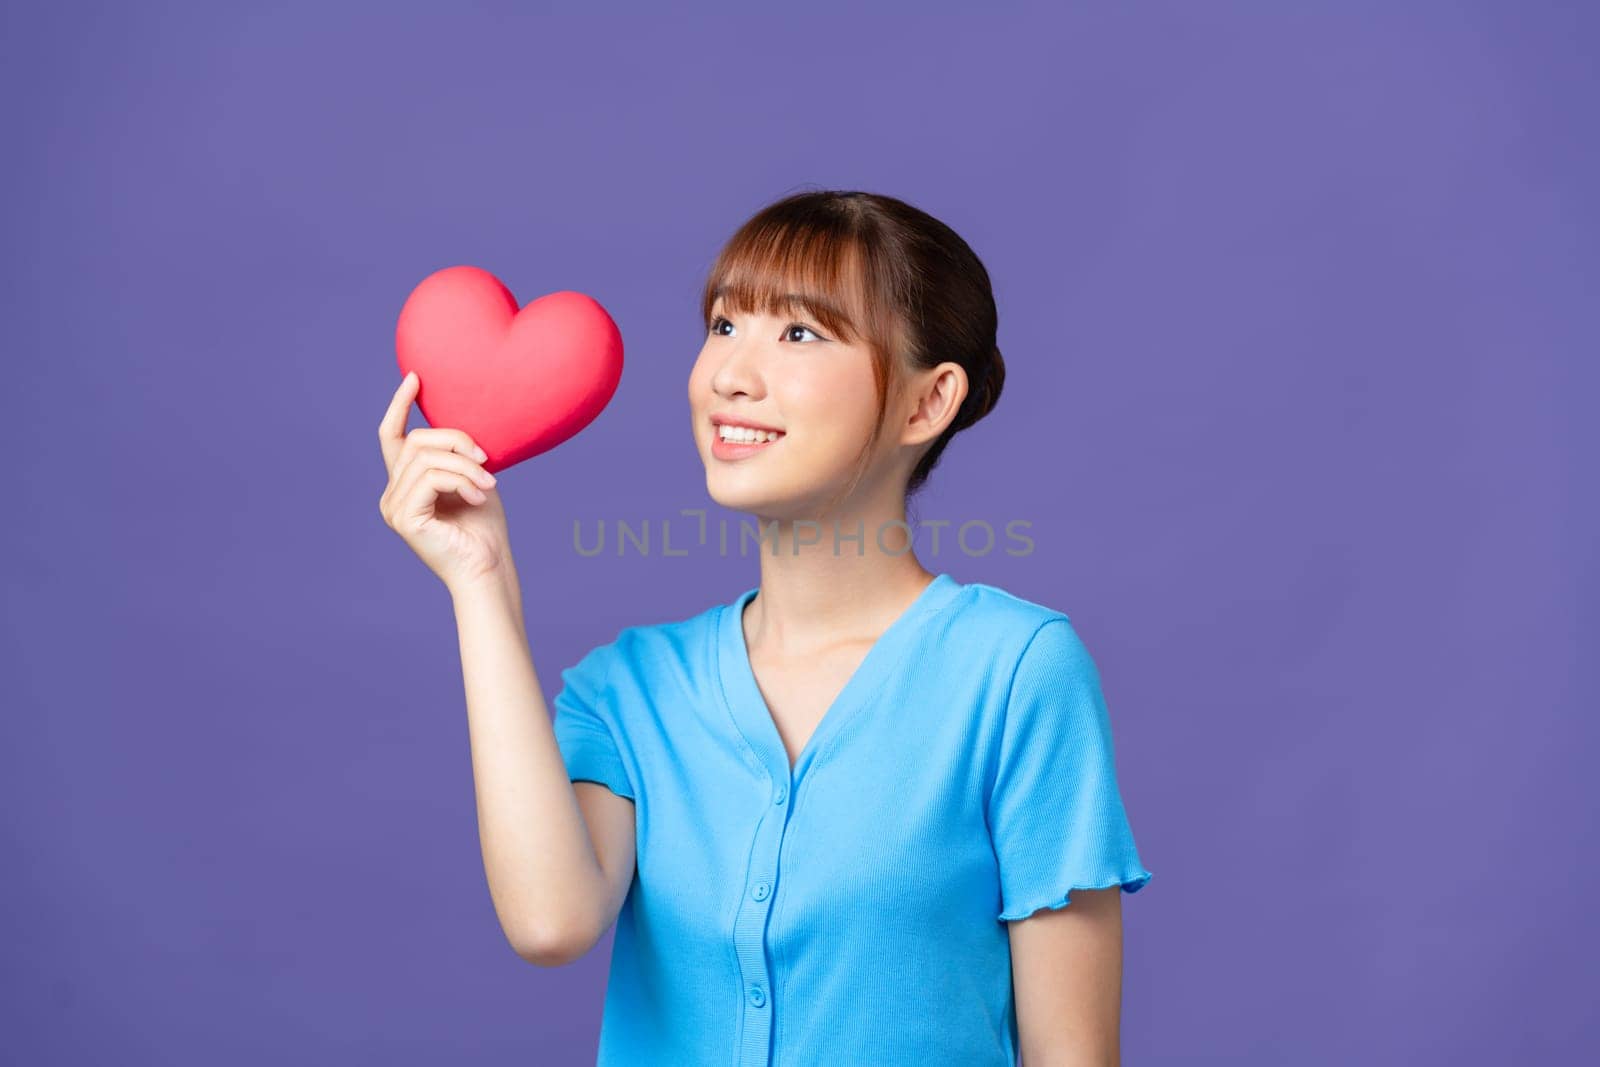 Smiling woman holding red heart on purple background by makidotvn